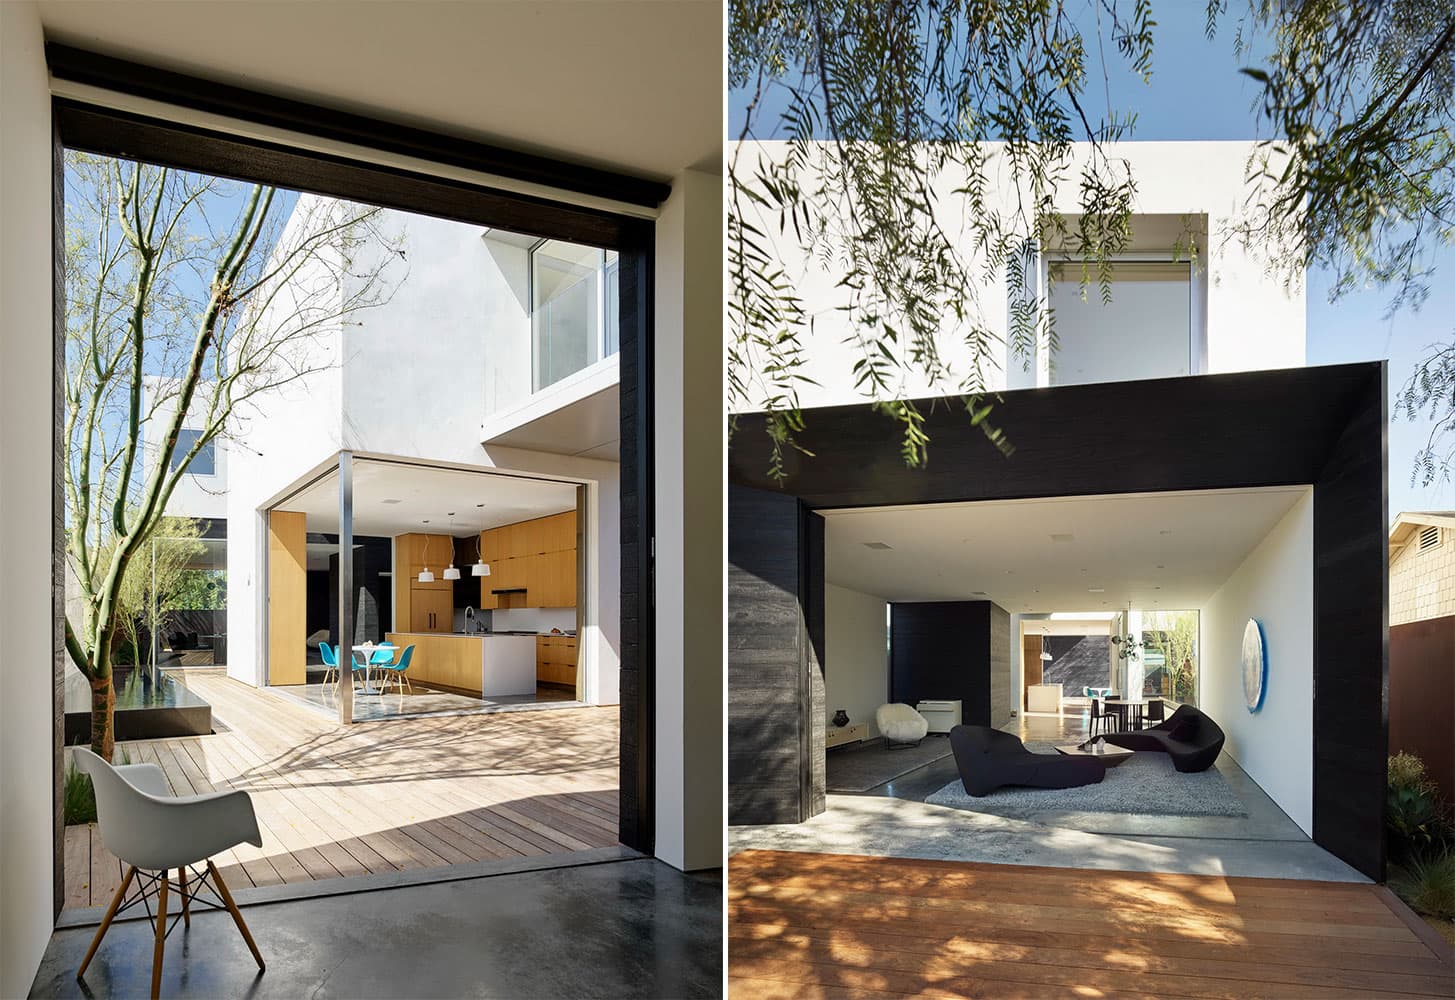 alt text: modern home with interior courtyard looking in